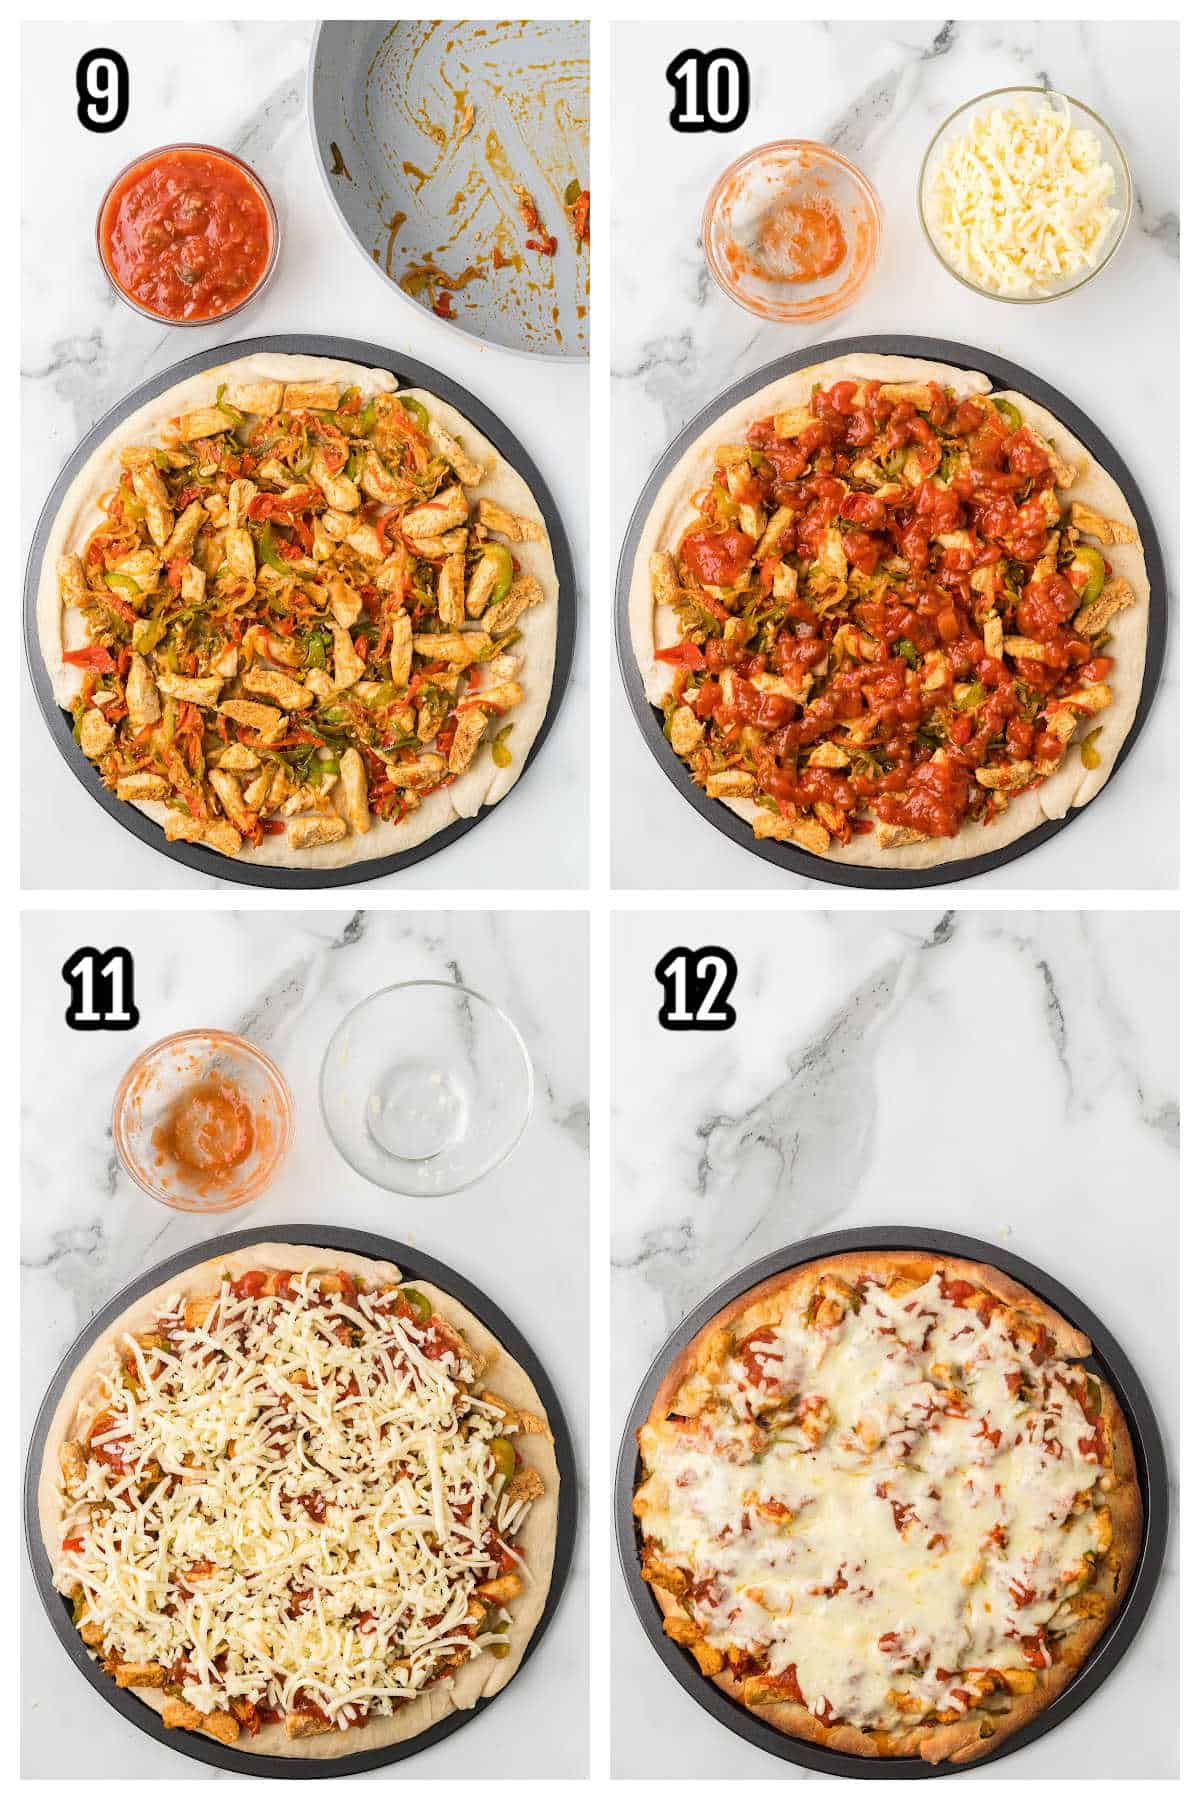 The third and final collage shows the steps to assembling and baking the Mexican pizza.